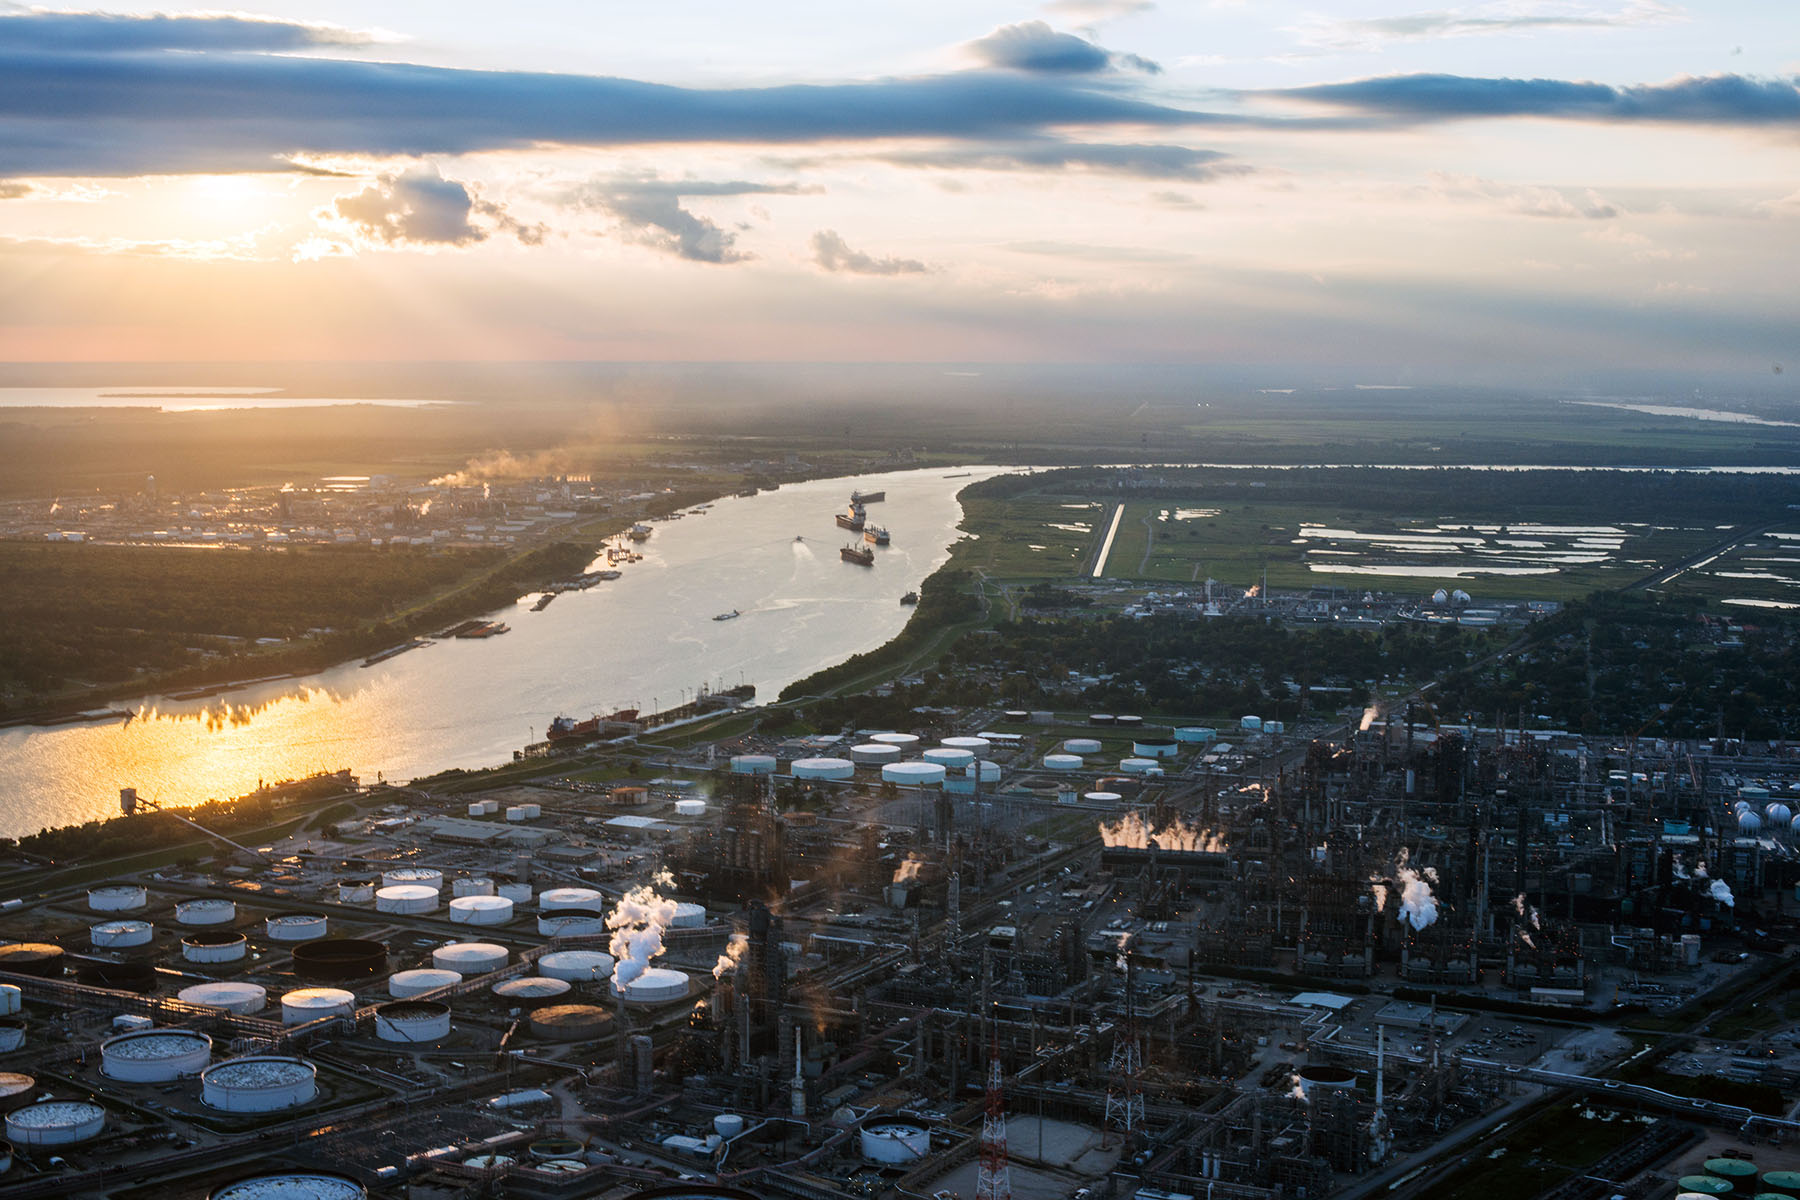 Chemical plants and factories line the roads and suburbs of the area known as "Cancer Alley."